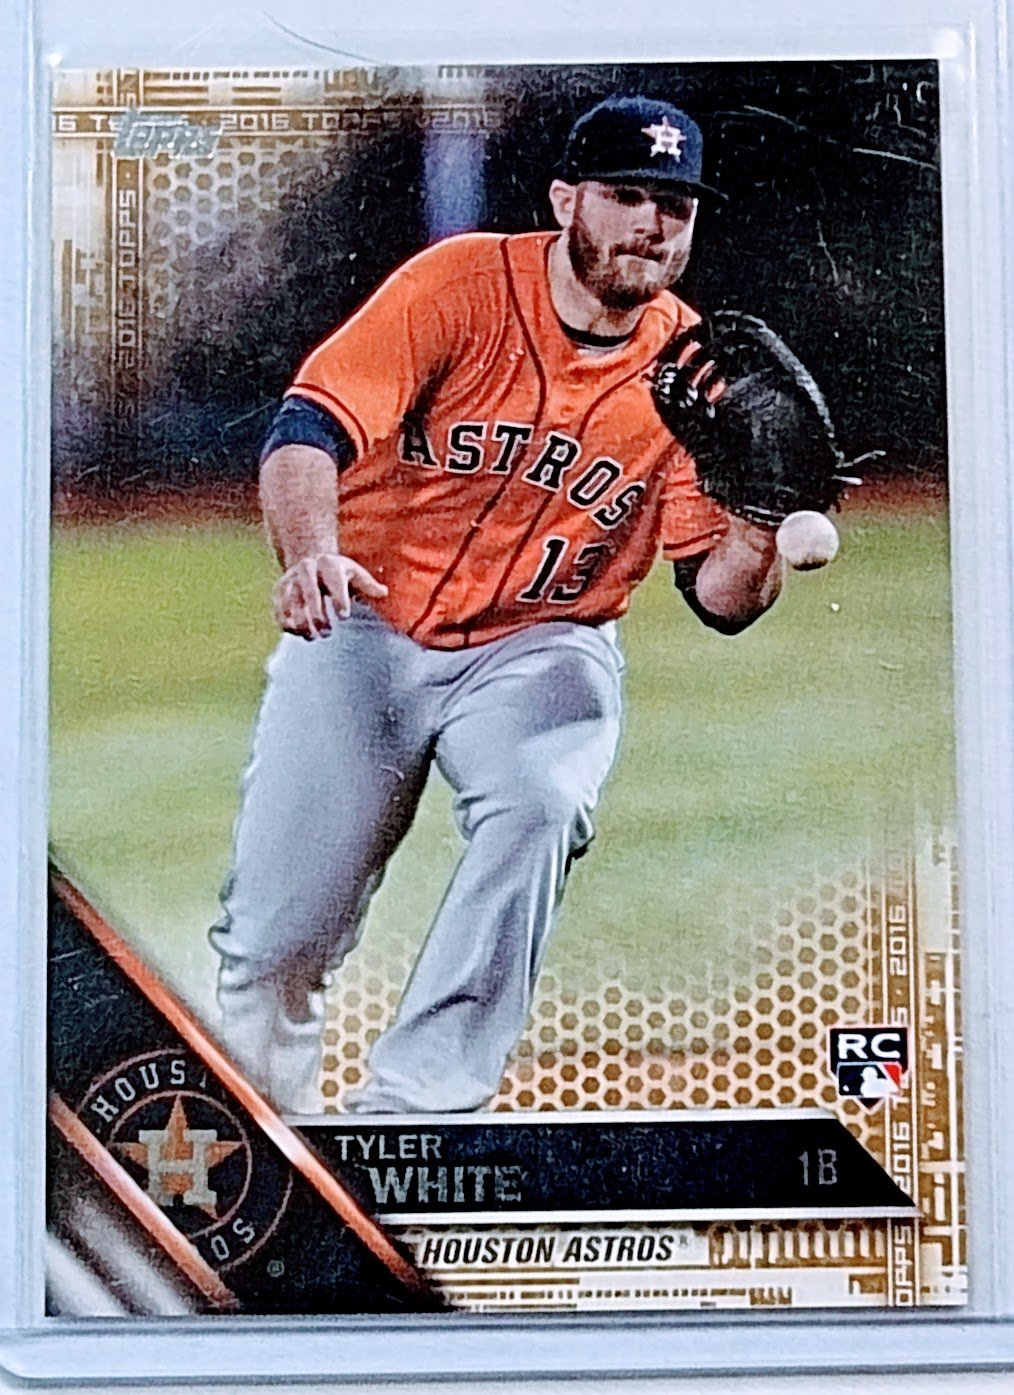 2016 Topps Tyler White Gold #'d/2016 Parallel Baseball Card TPTV simple Xclusive Collectibles   